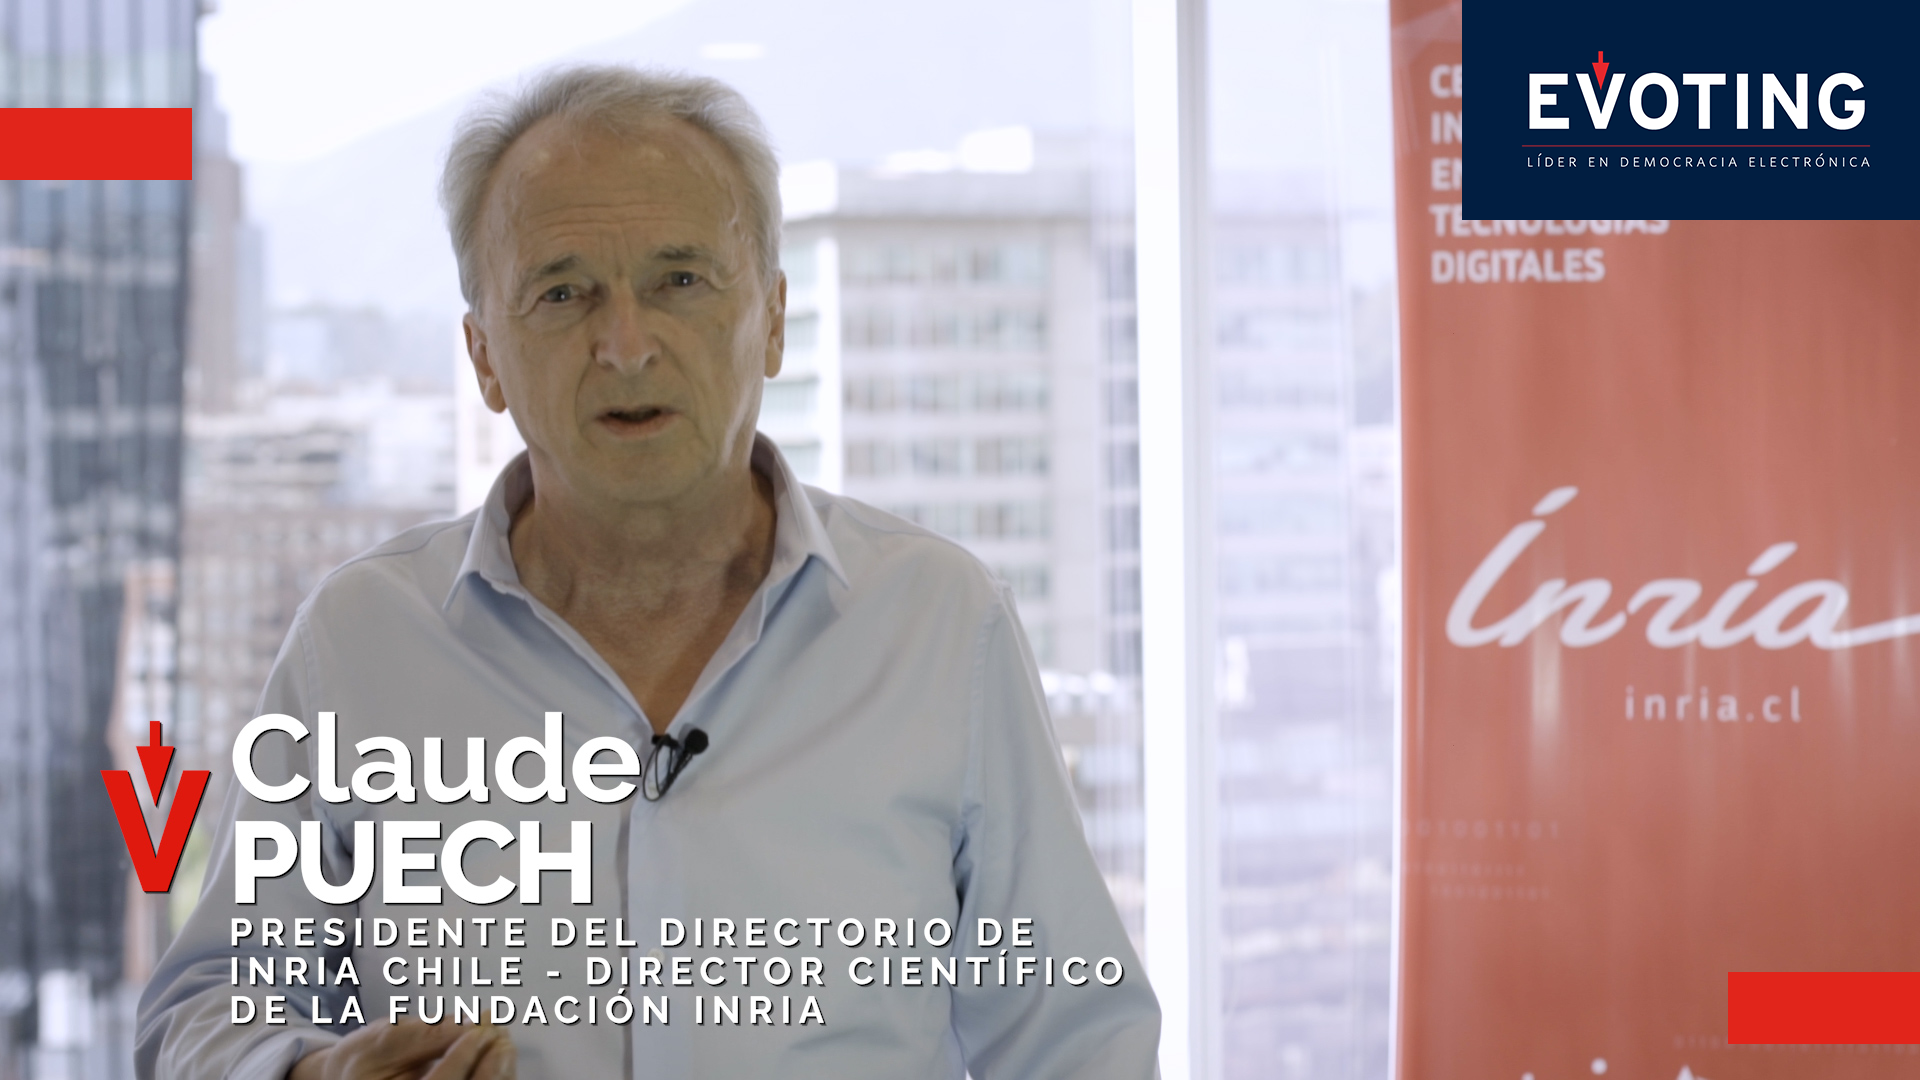 Claude Peuch, Chairman of the Board of Inria Chile and Scientific Director of the Inria Foundation, shares his thoughts on what it was like to contribute to the growth of EVoting during its beginnings and how he sees the projection of electronic voting in the region and the rest of the world.